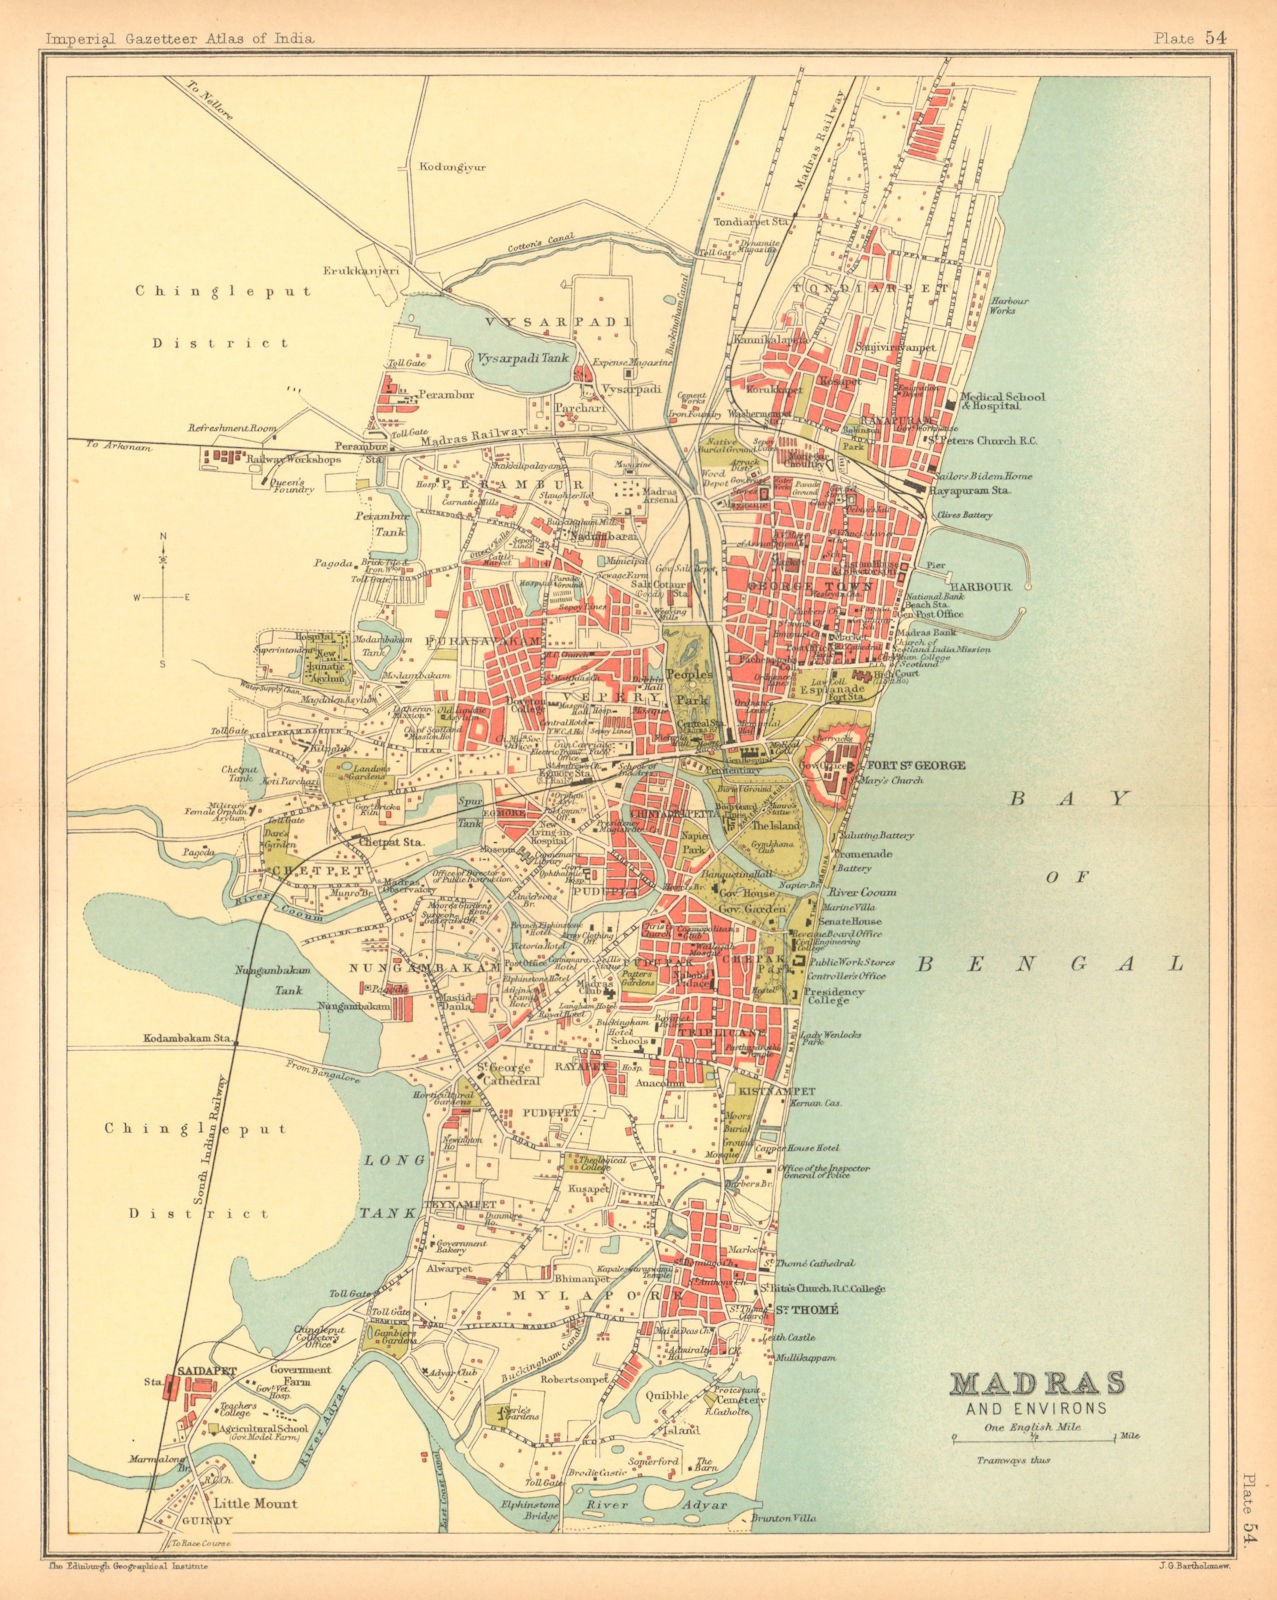 Associate Product Madras/Chennai town city plan. Key buildings. British India 1909 old map